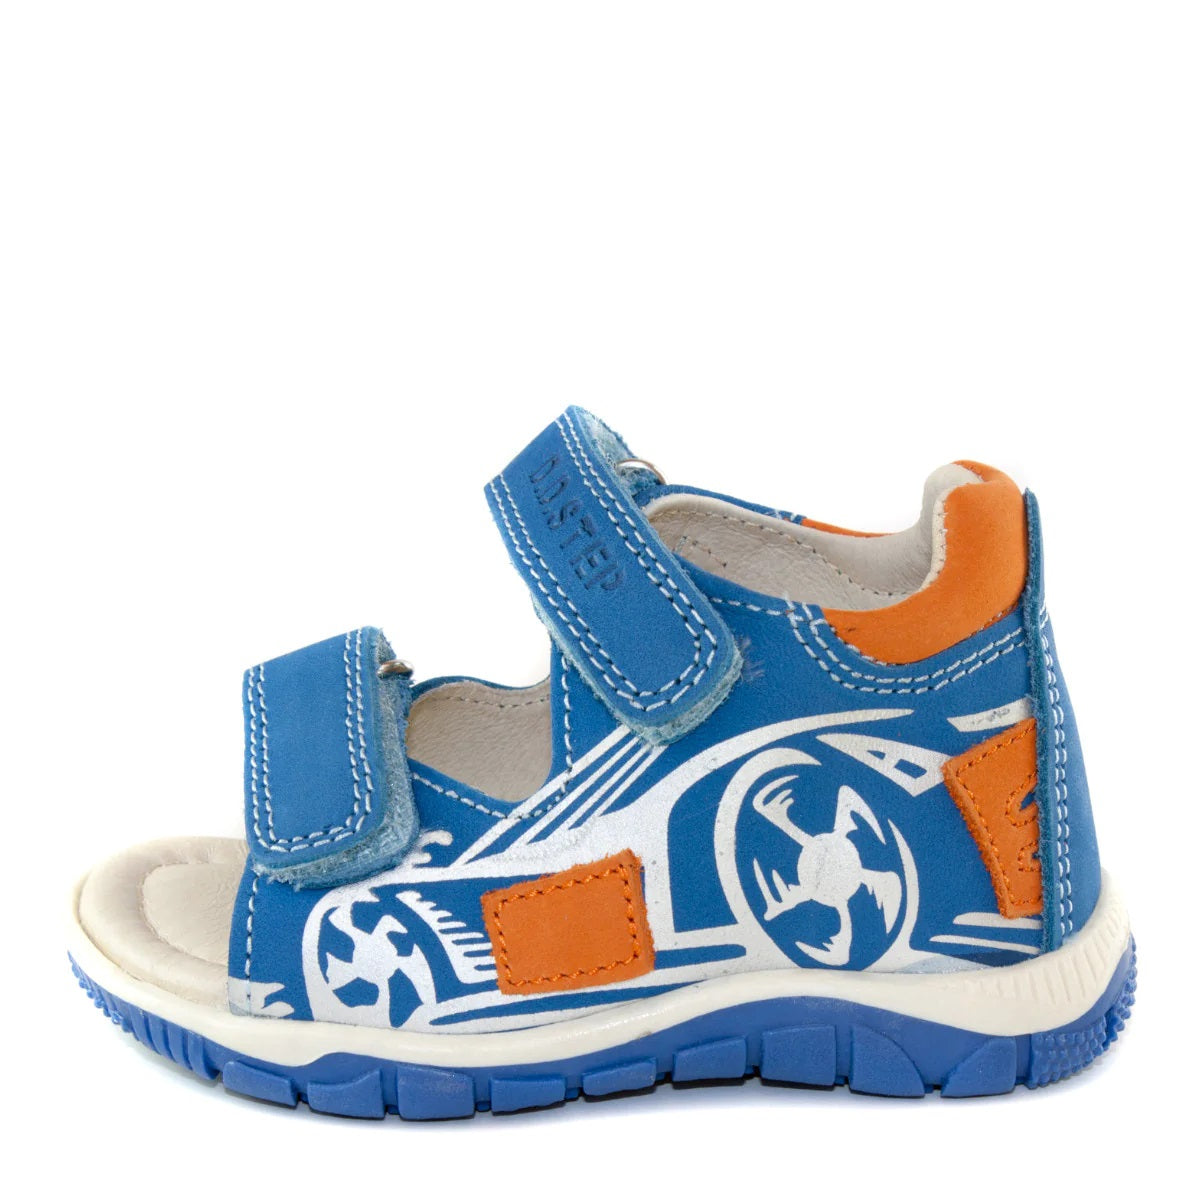 Premium quality sandals with genuine leather lining and upper in blue with race car pattern and double strap. Thanks to its high level of specialization, D.D. Step knows exactly what your child’s feet need, to develop properly in the various phases of growth. The exceptional comfort these shoes provide assure the well-being and happiness of your child.